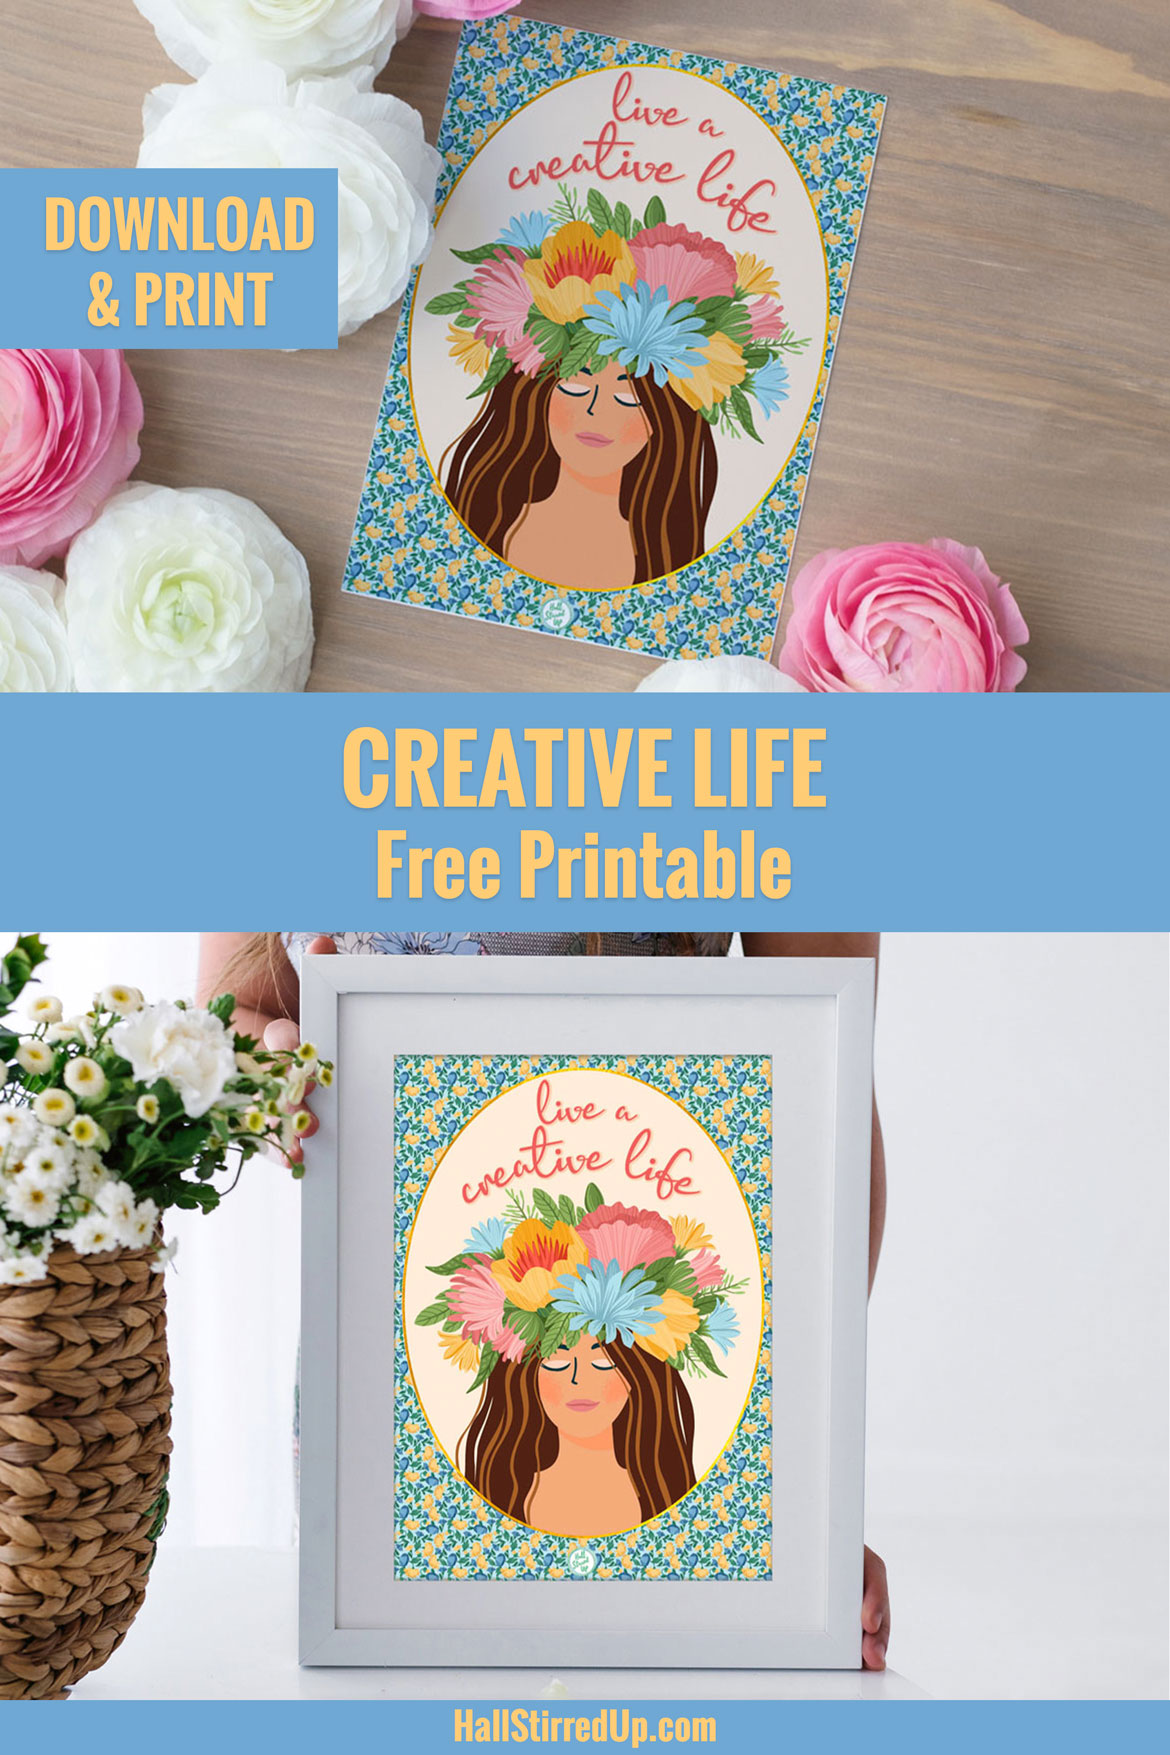 Live a creative life Monthly Motivation includes printable